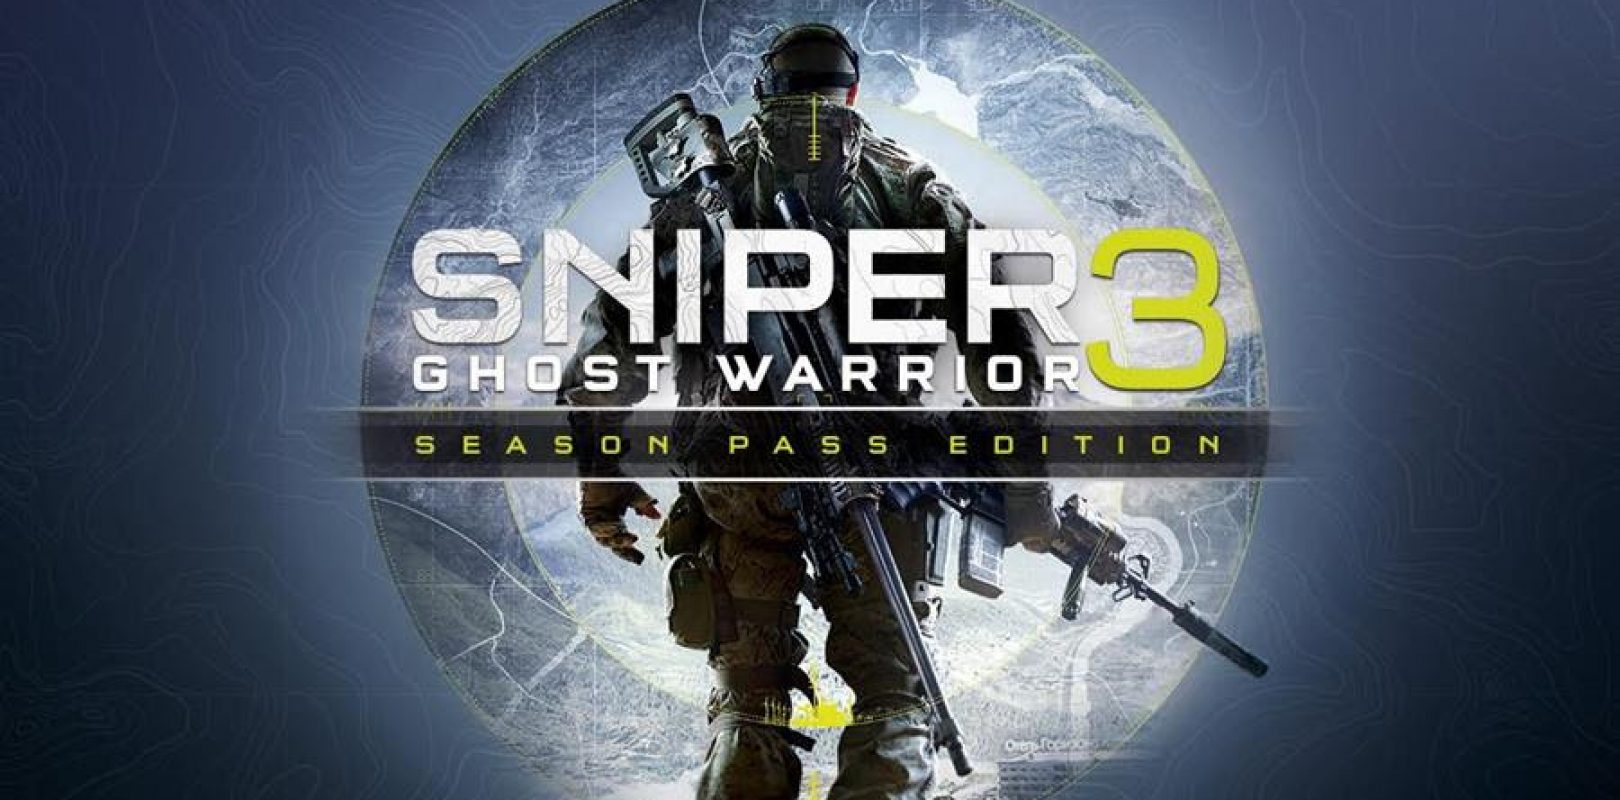 sniper 3 ghost warrior reviews